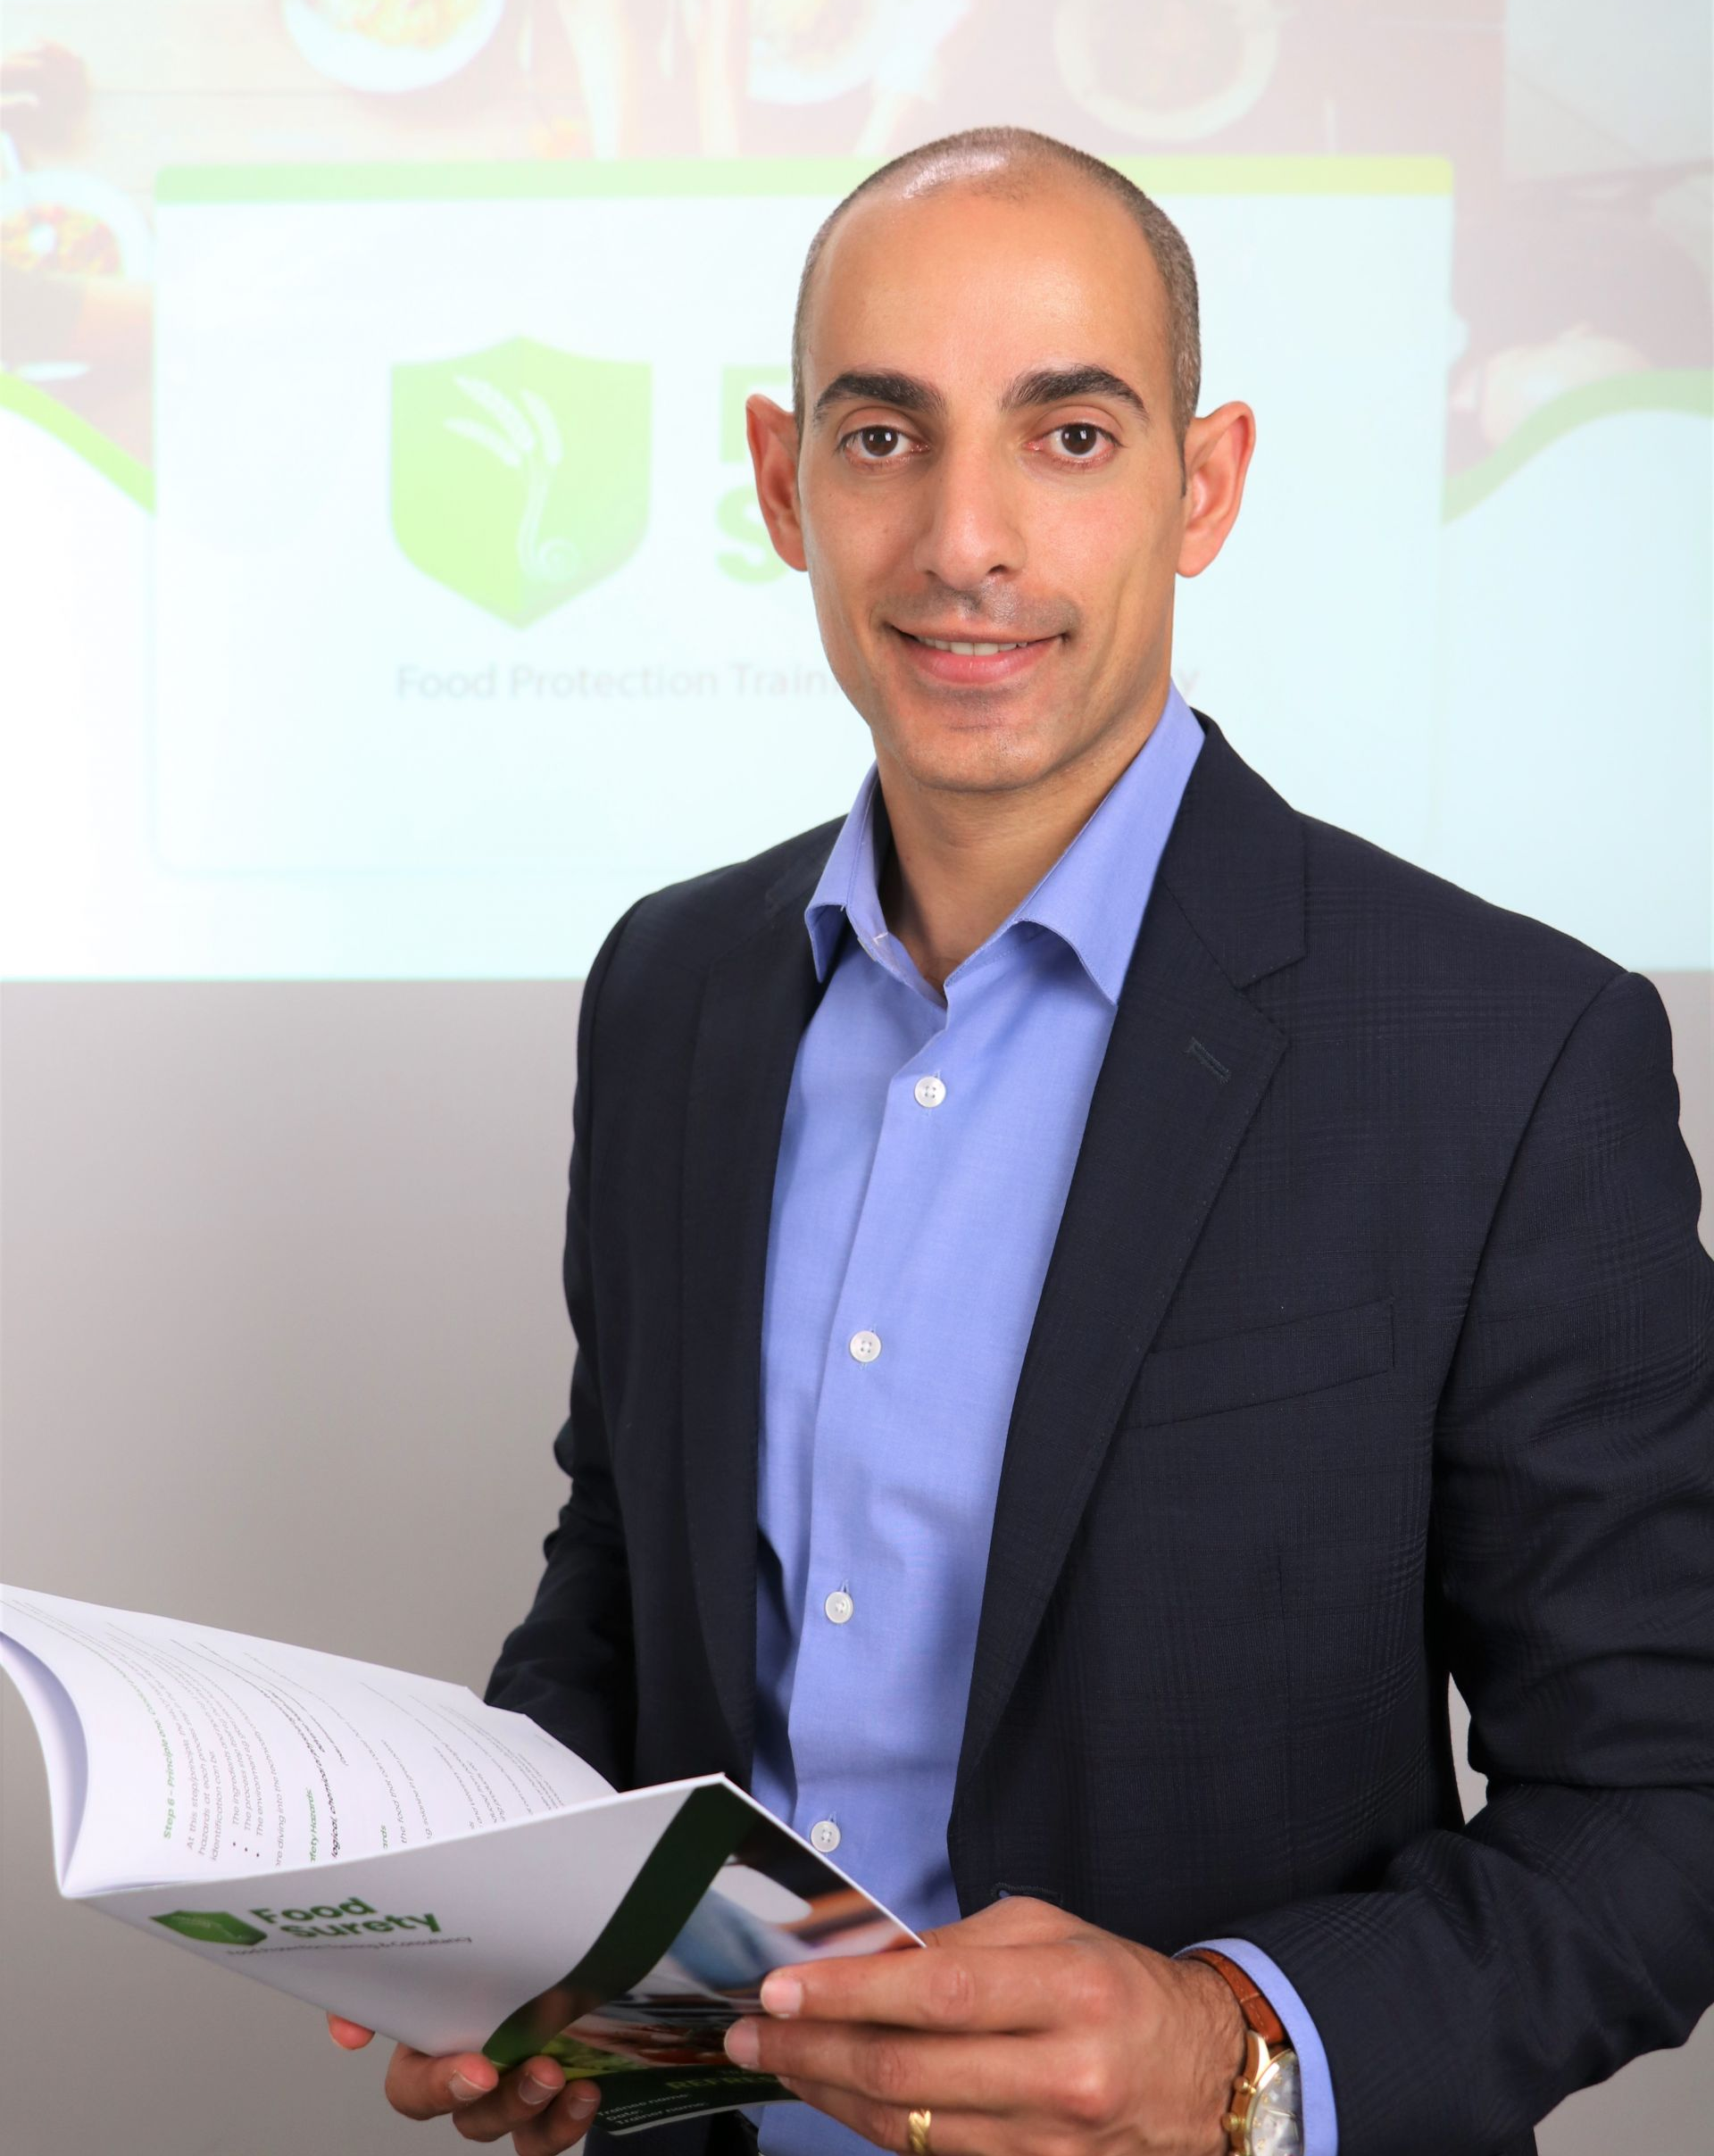 Refresher HACCP course trainer. NZ HACCP Certification Trainer Ray Haddad